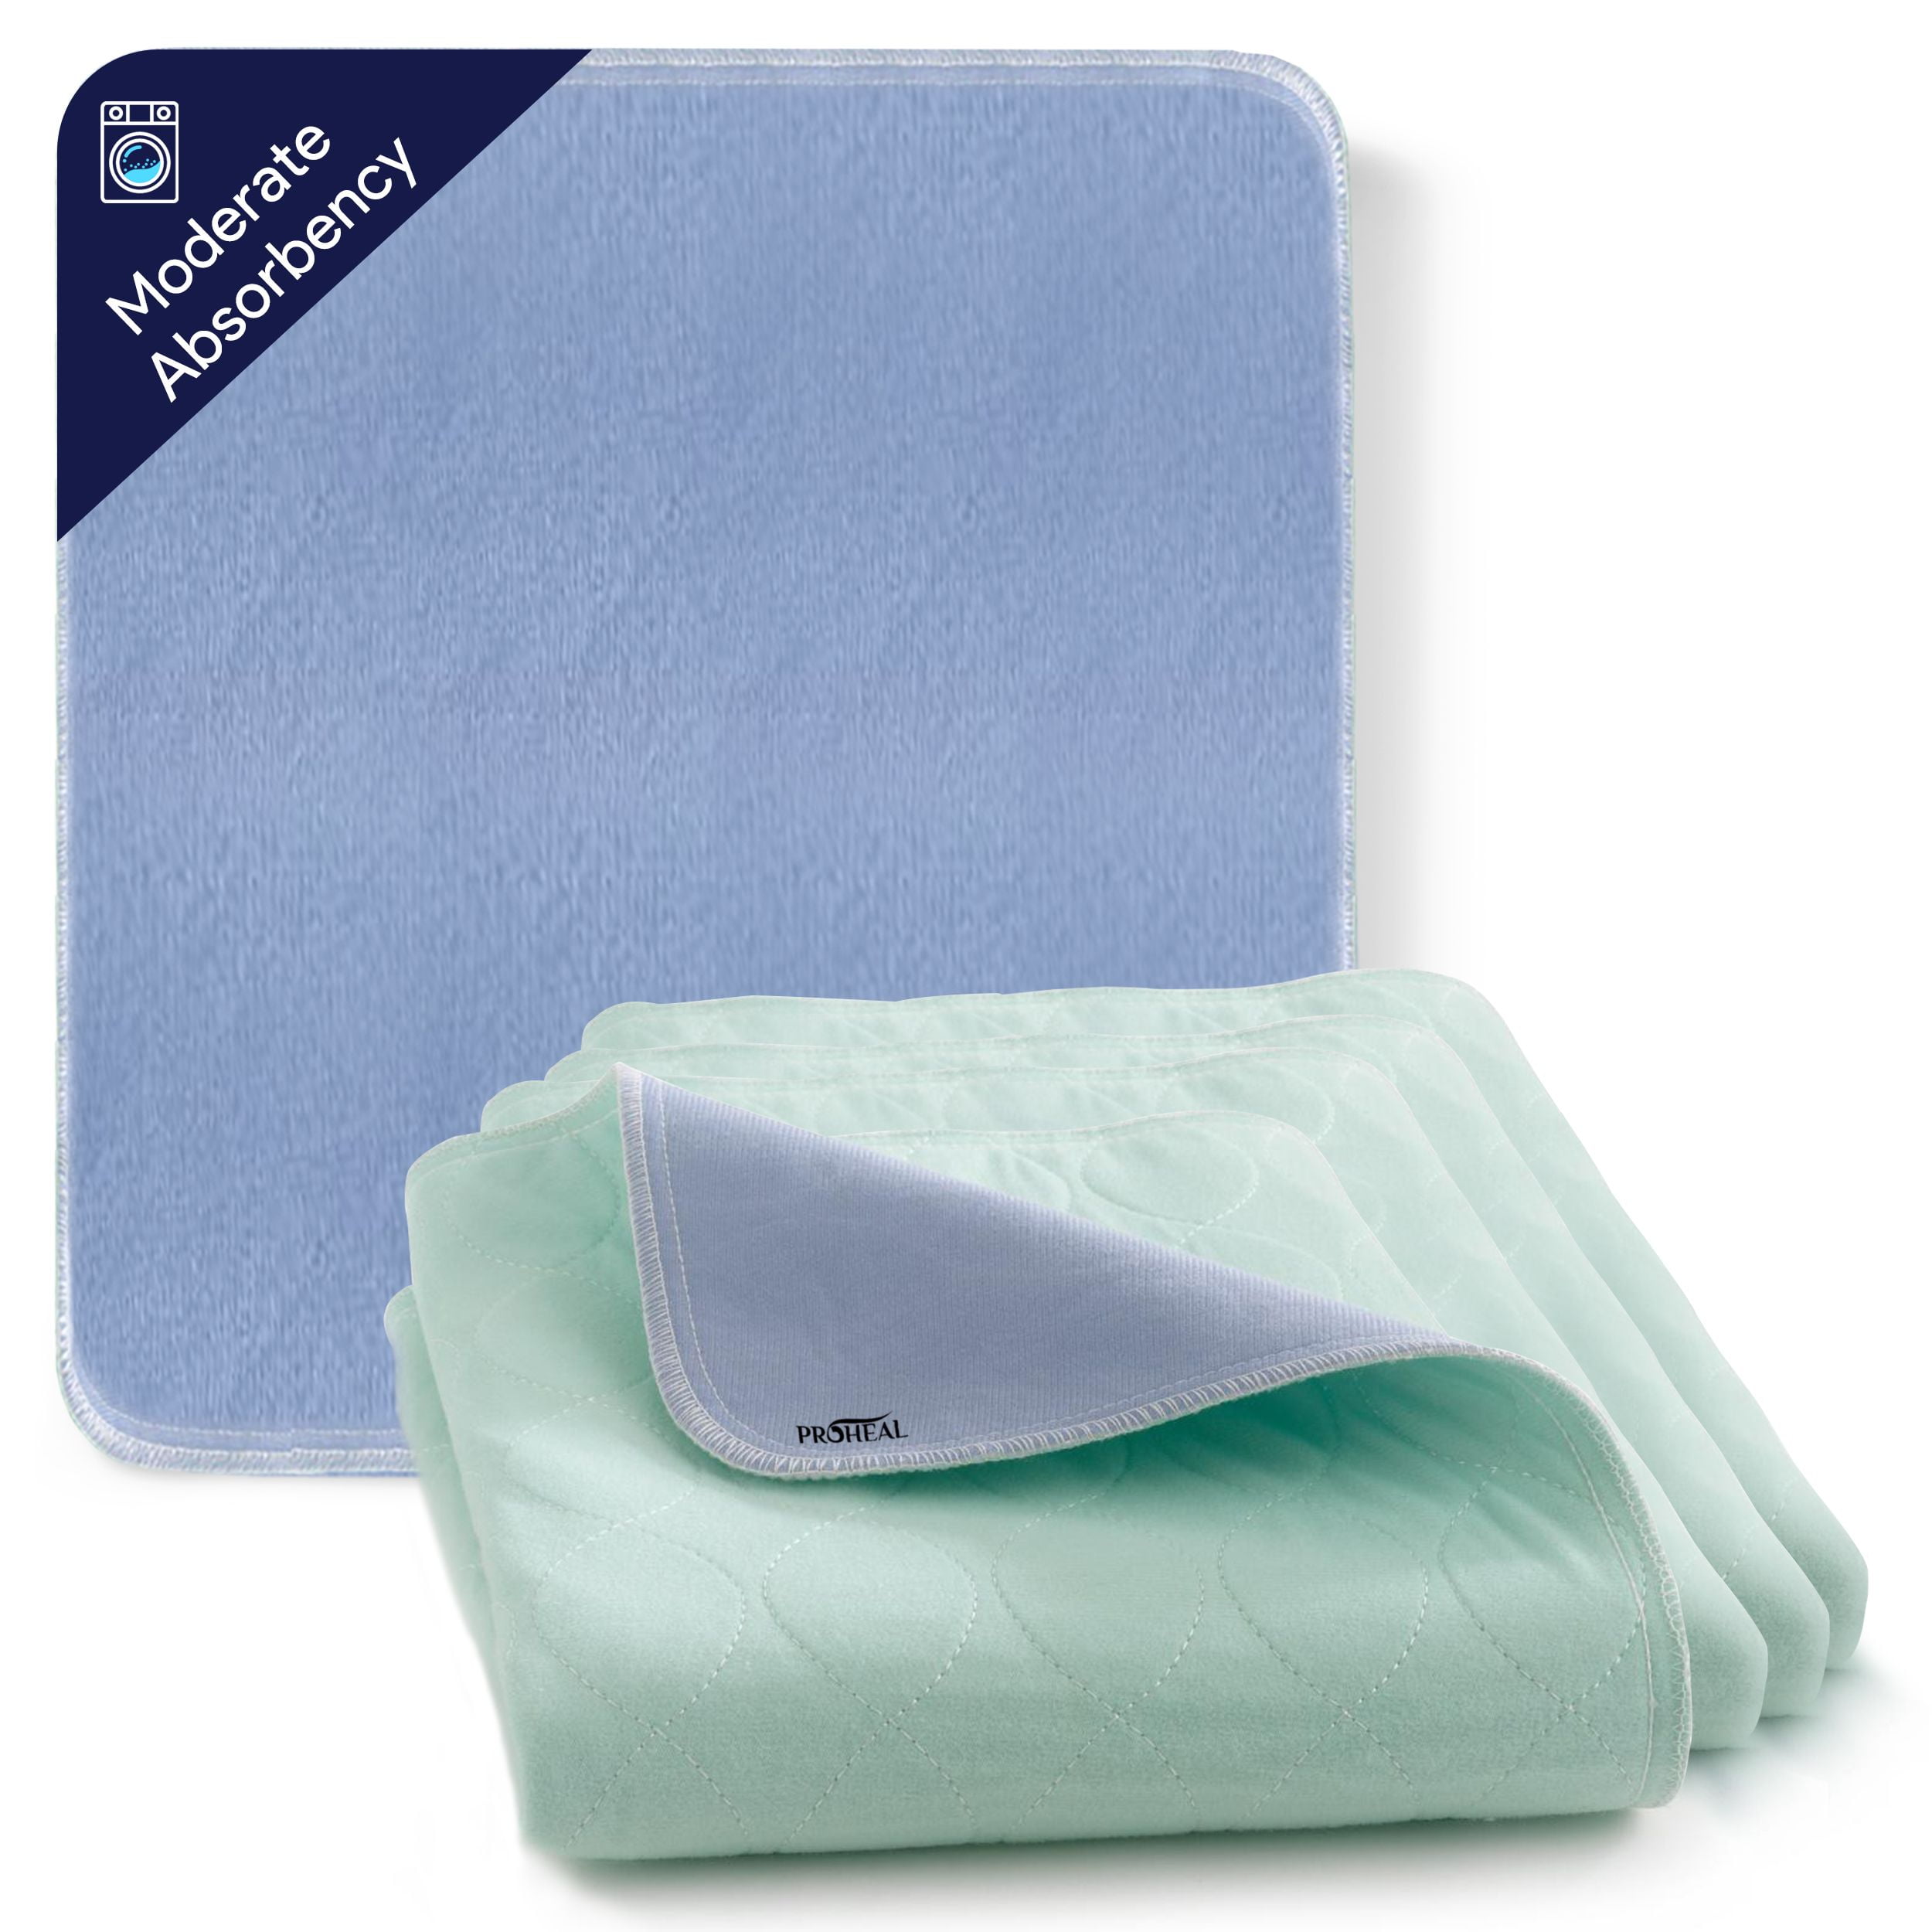 BH 35 X 35 Reusable Bed Pads / Underpads (12 PACK) - BH Medwear